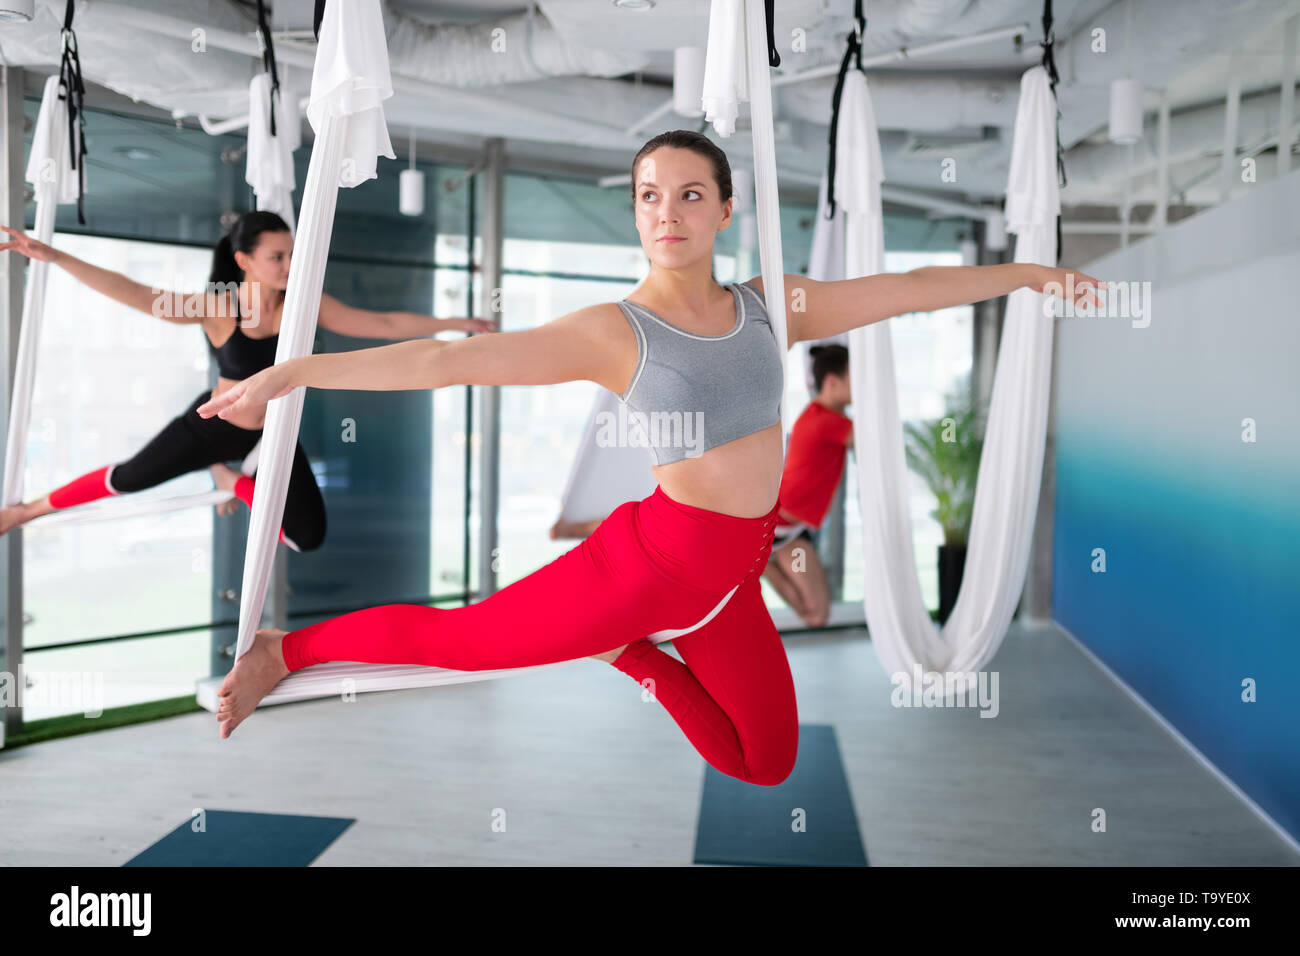 Businesswoman in red leggings attending aerial yoga course Stock Photo